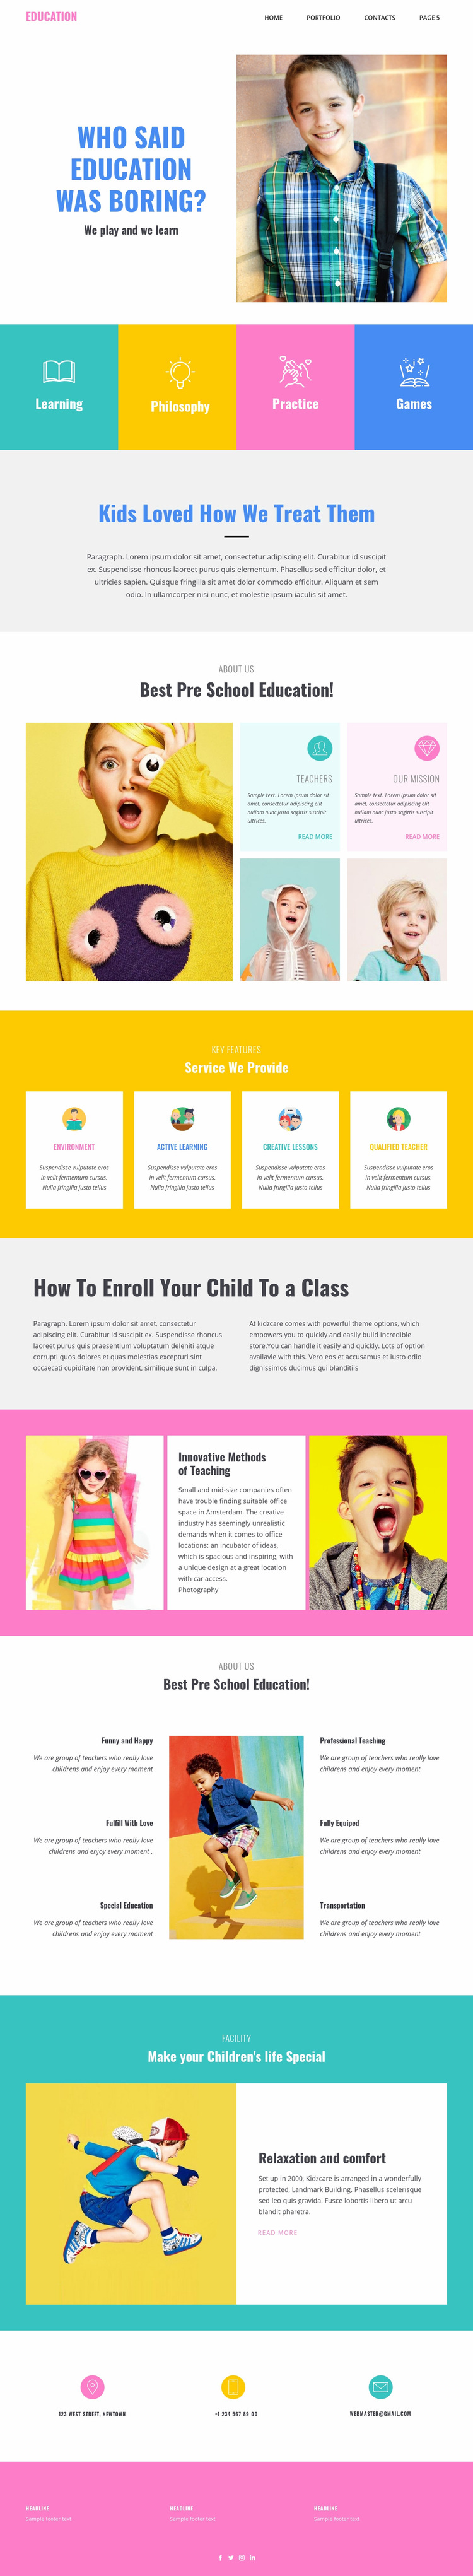 Fun of learning in school Web Page Design